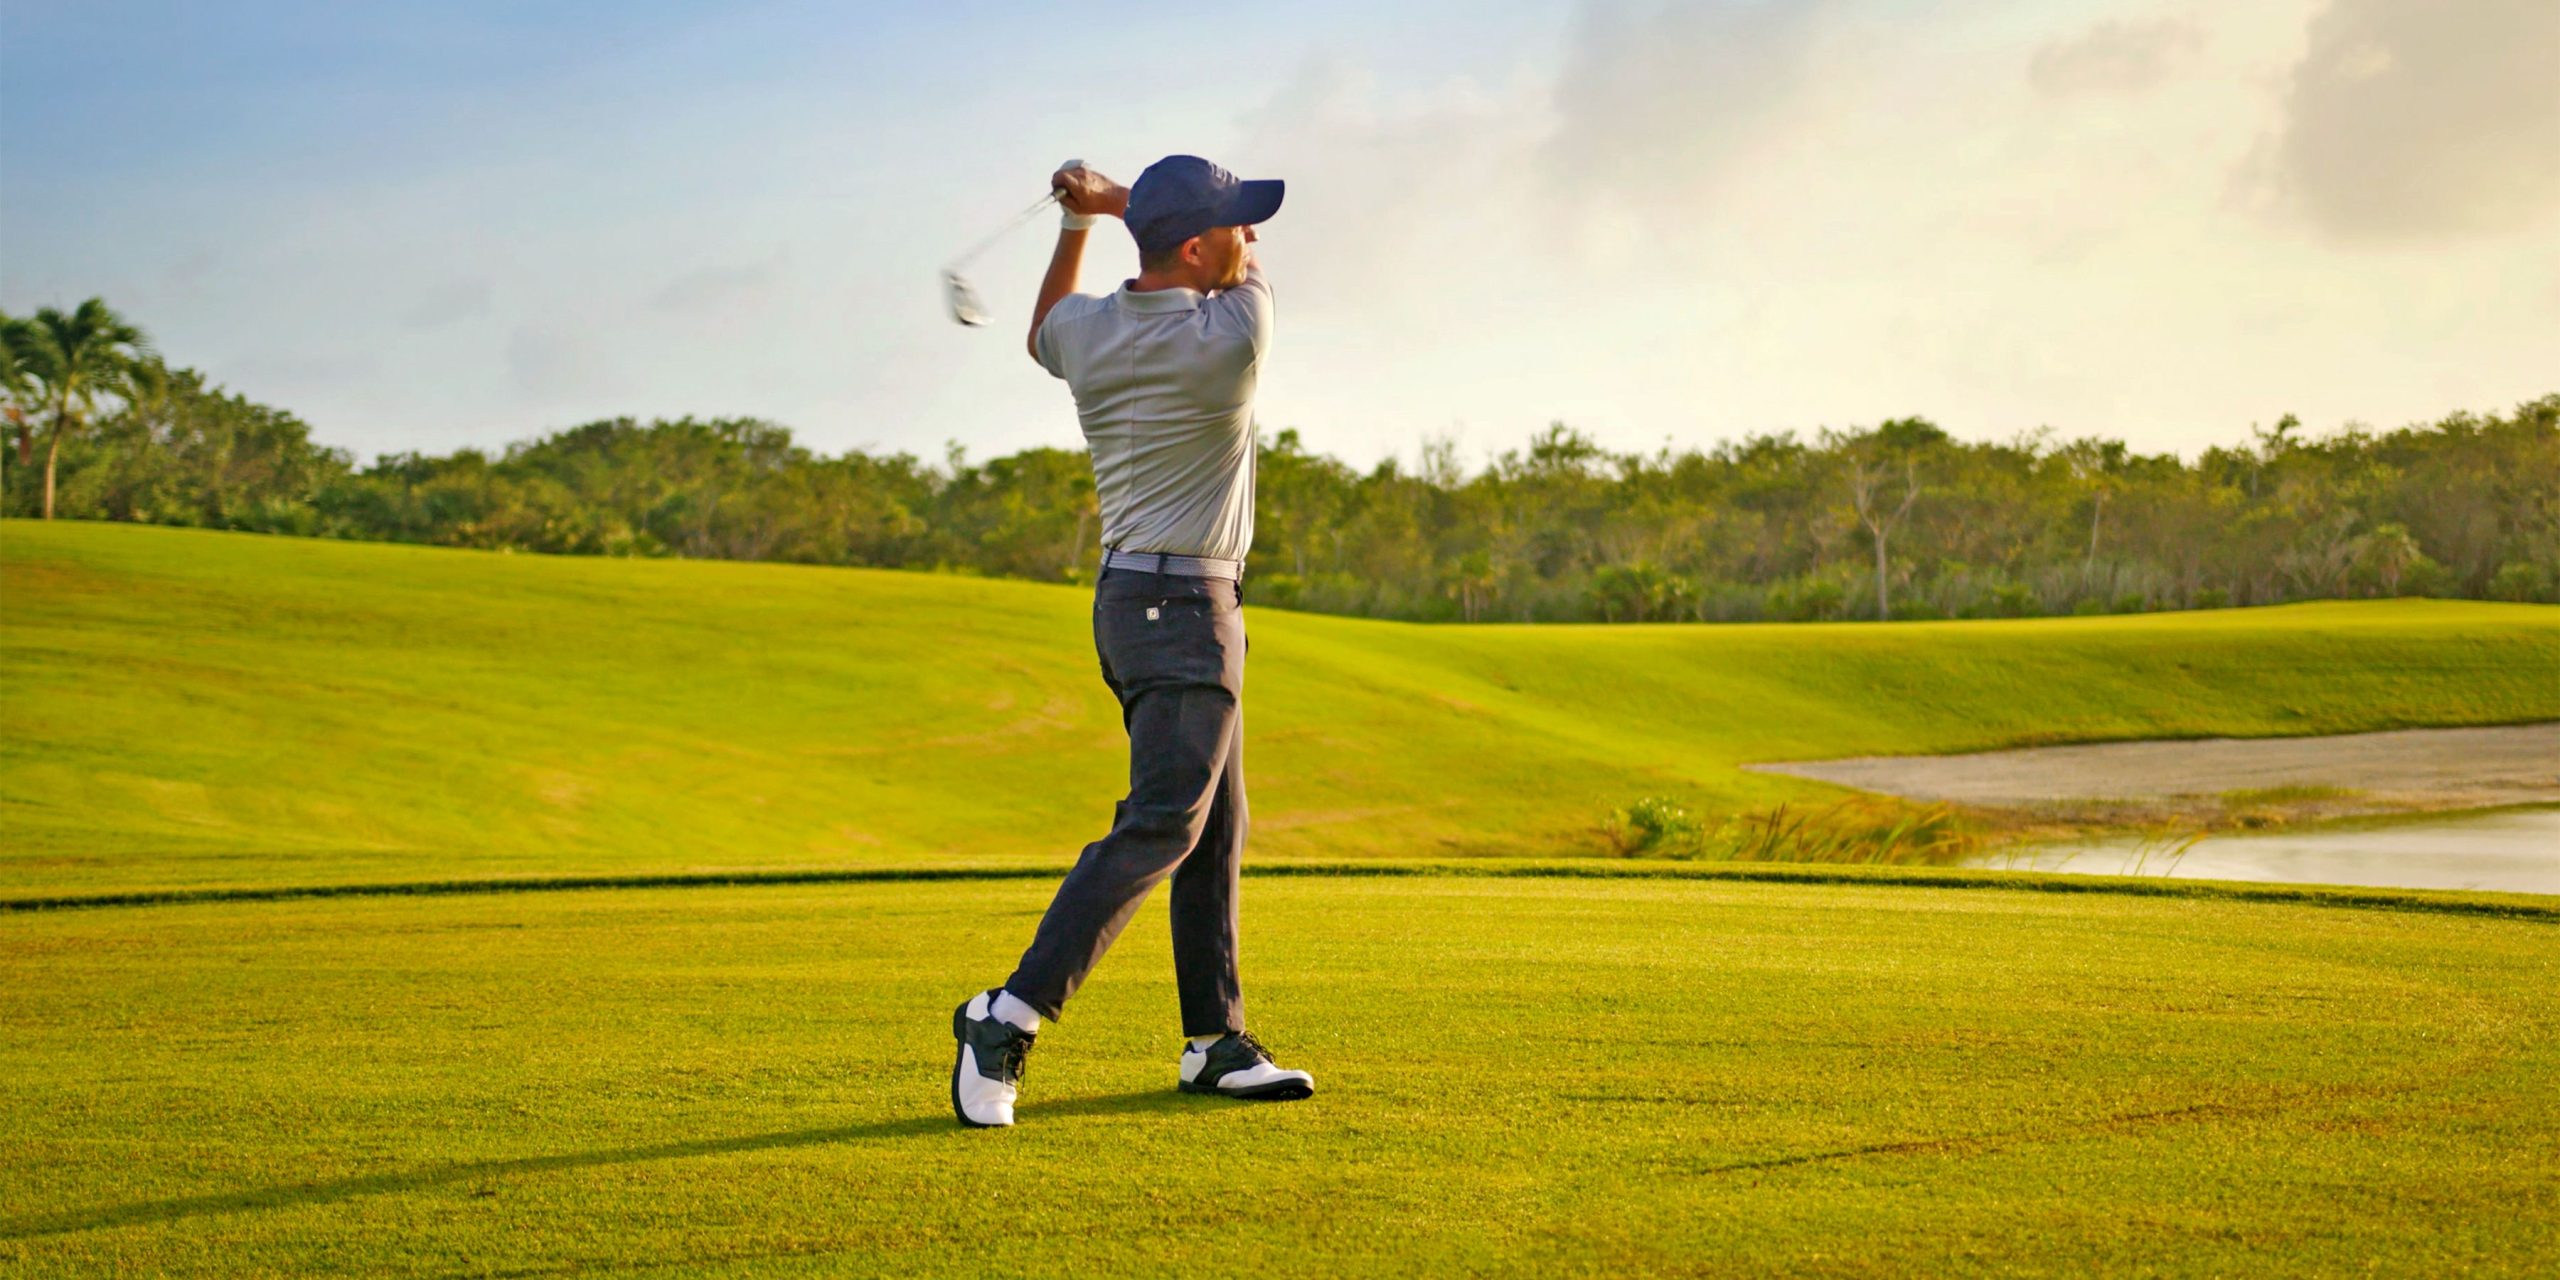 Some updates you should know about the golf vacation in Hawaii